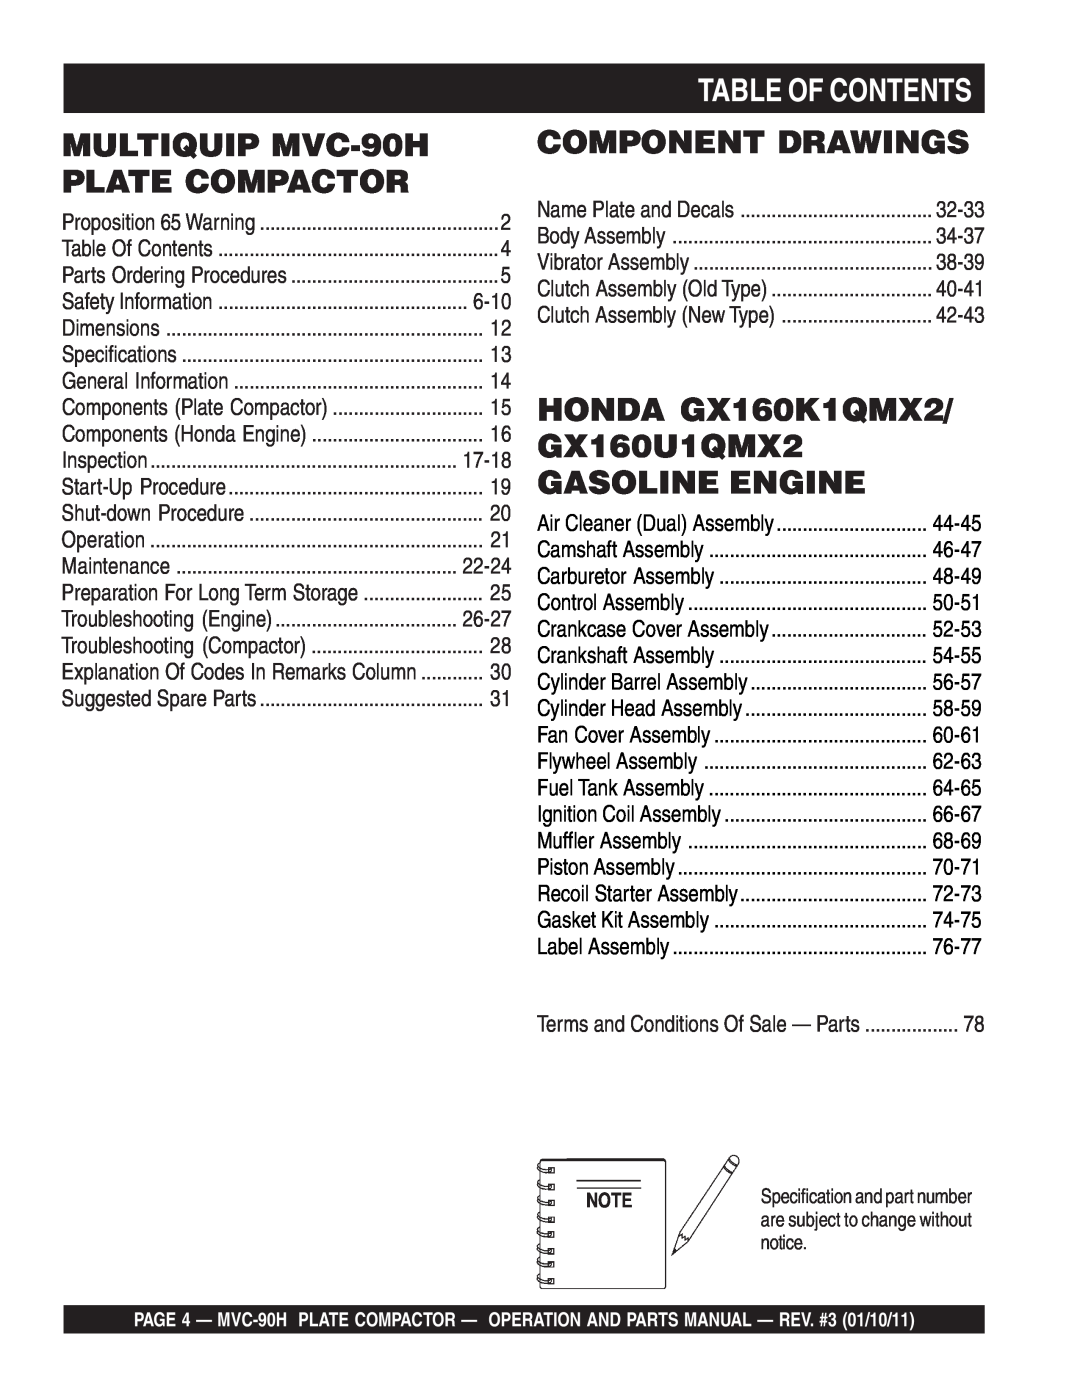 Multiquip manual MULTIQUIP MVC-90H, Plate Compactor, Table Of Contents, Component Drawings, 6-10 